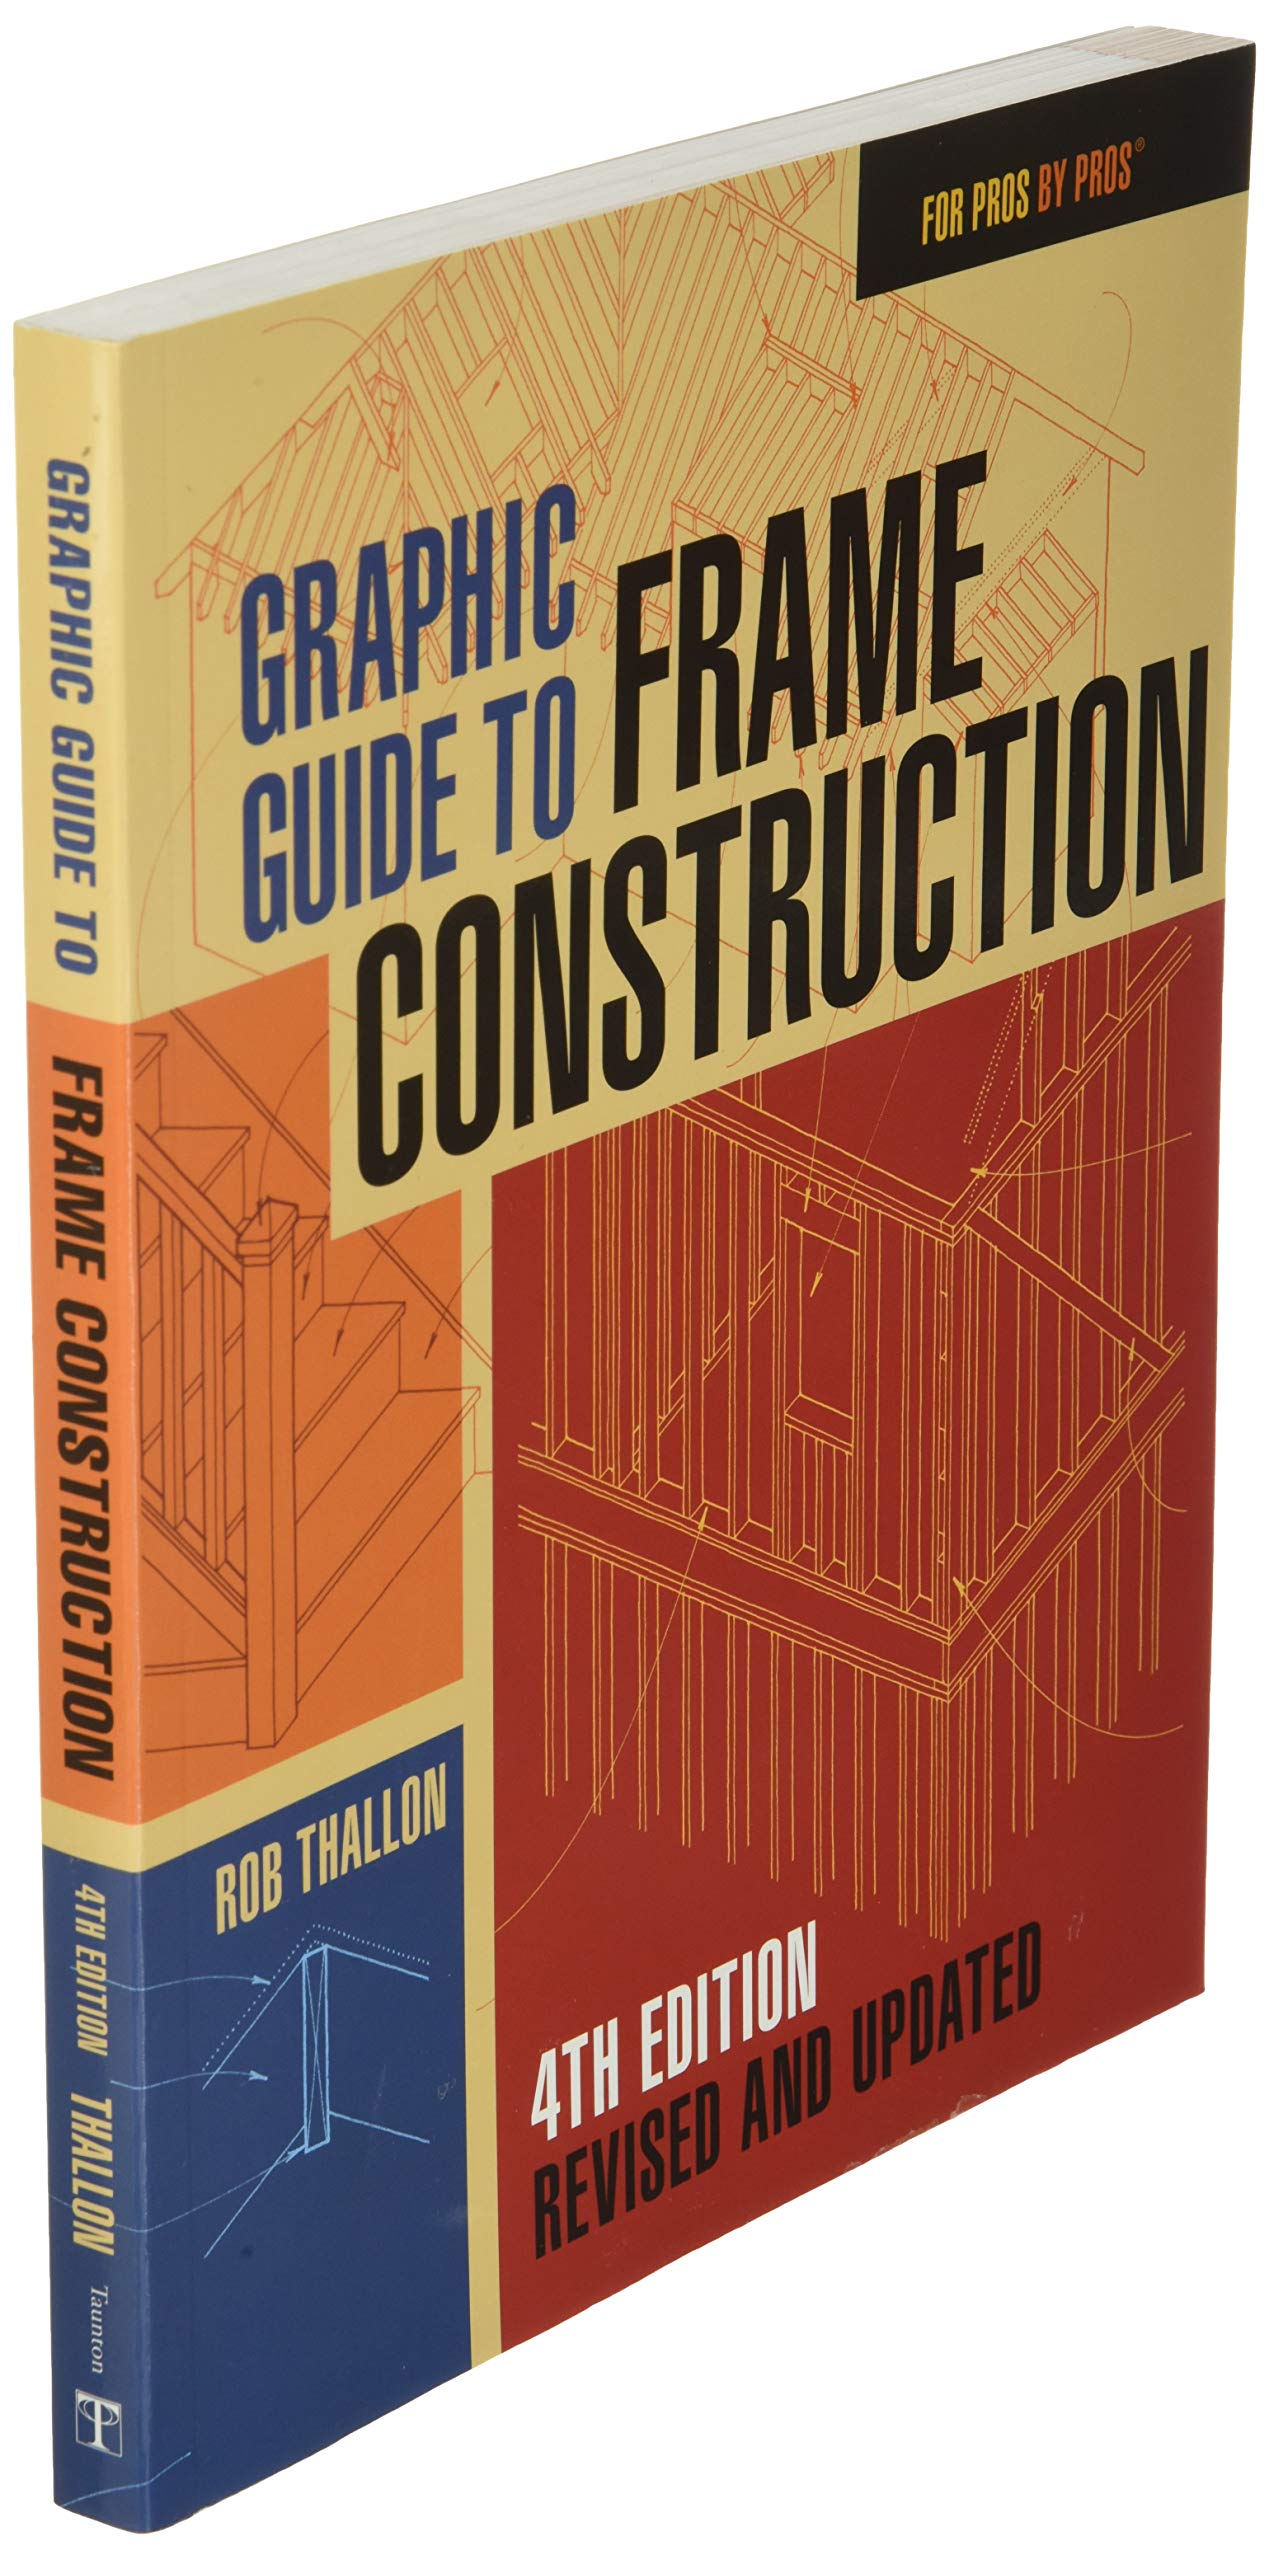 Graphic Guide to Frame Construction